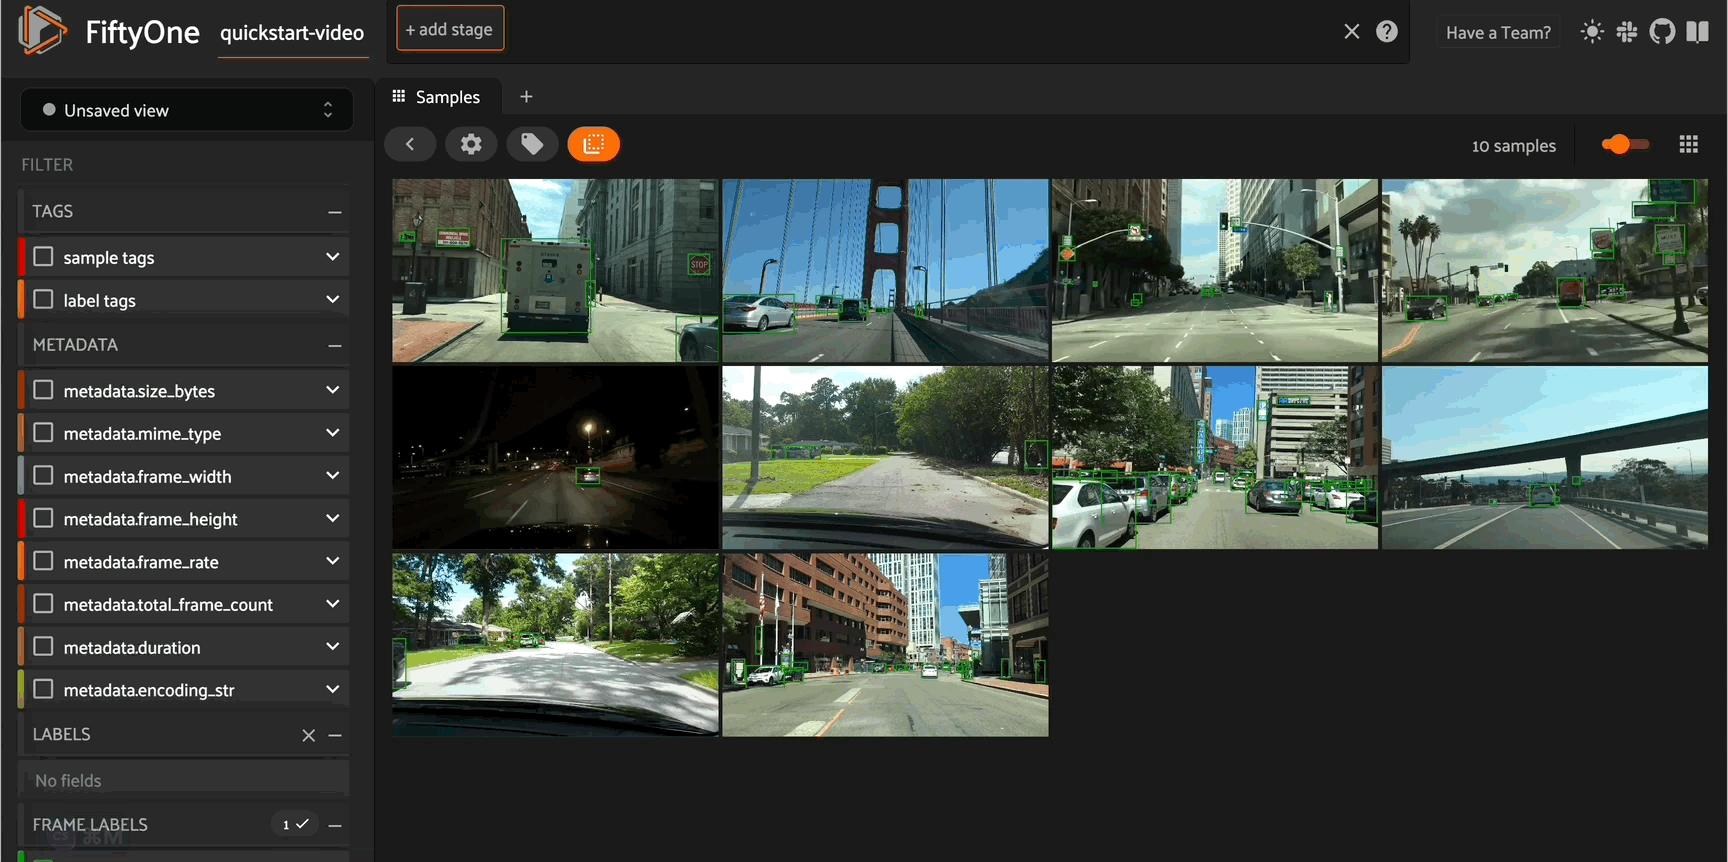 Natural language video search in FiftyOne to find video frames with cars in an intersection